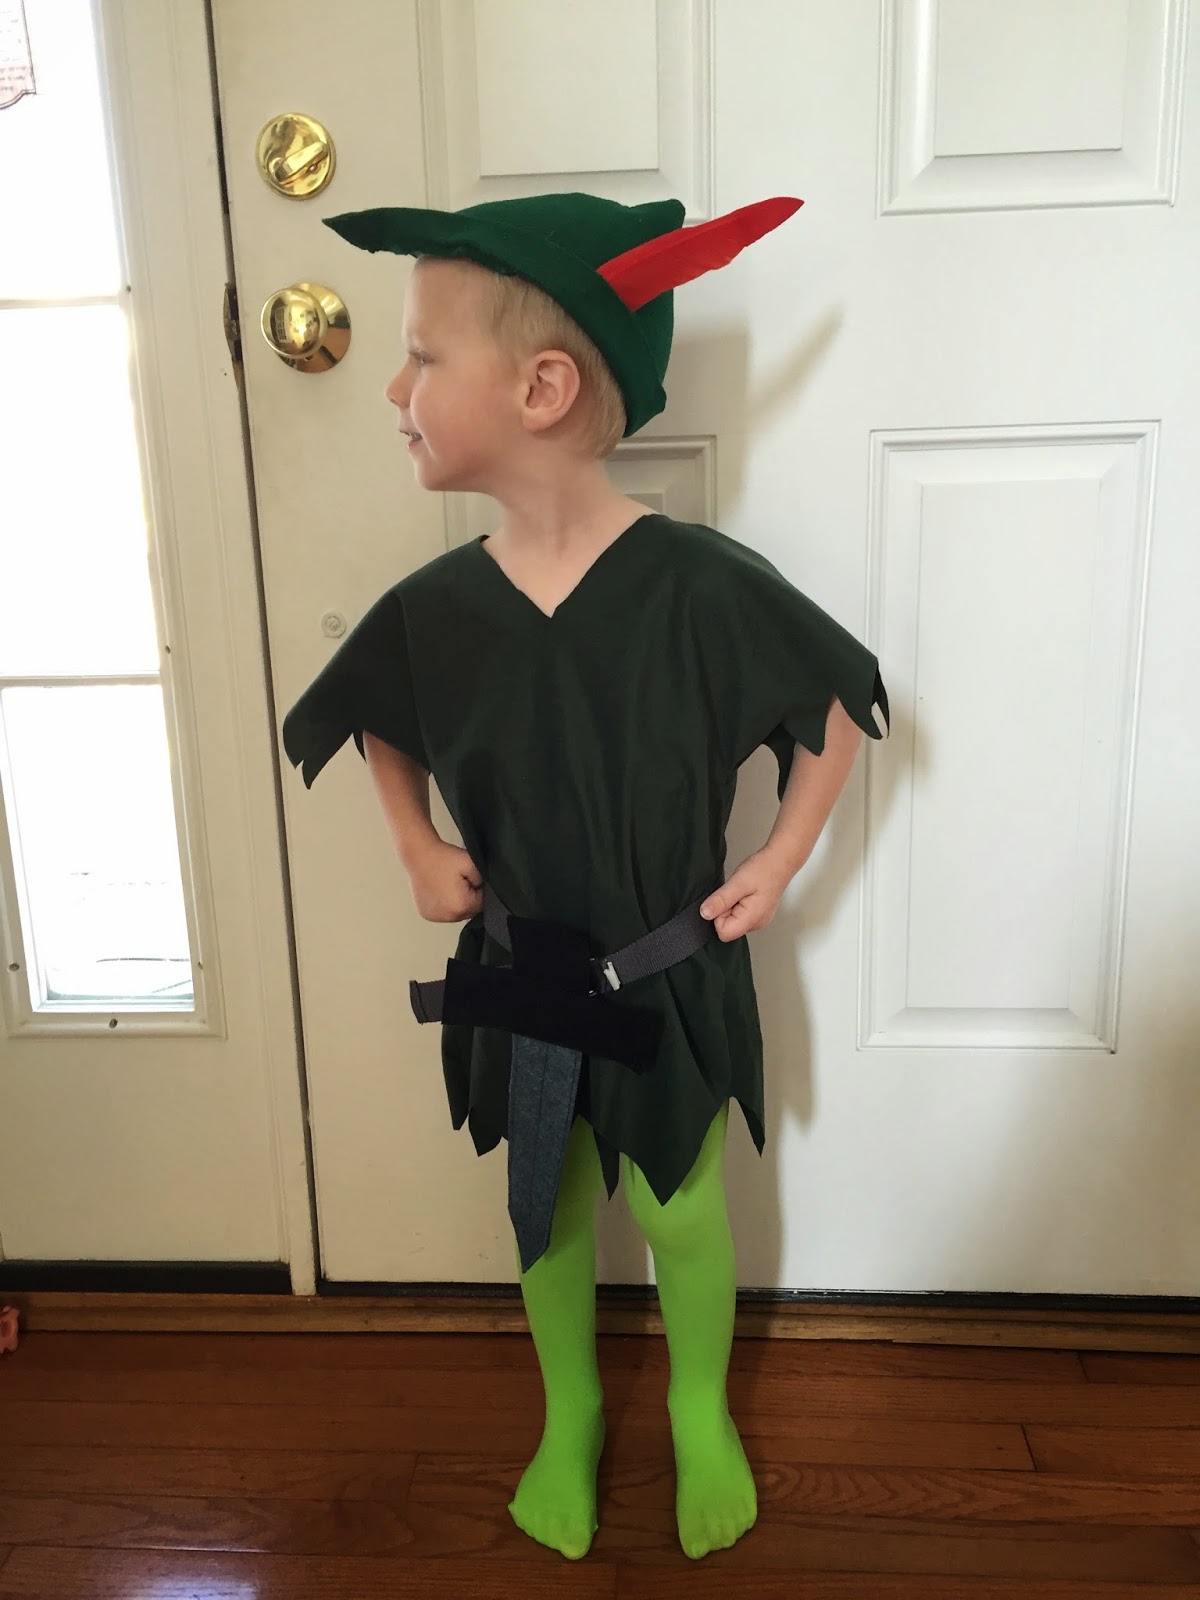 Welcome to the Krazy Kingdom: Peter Pan Costumes - Peter Pan